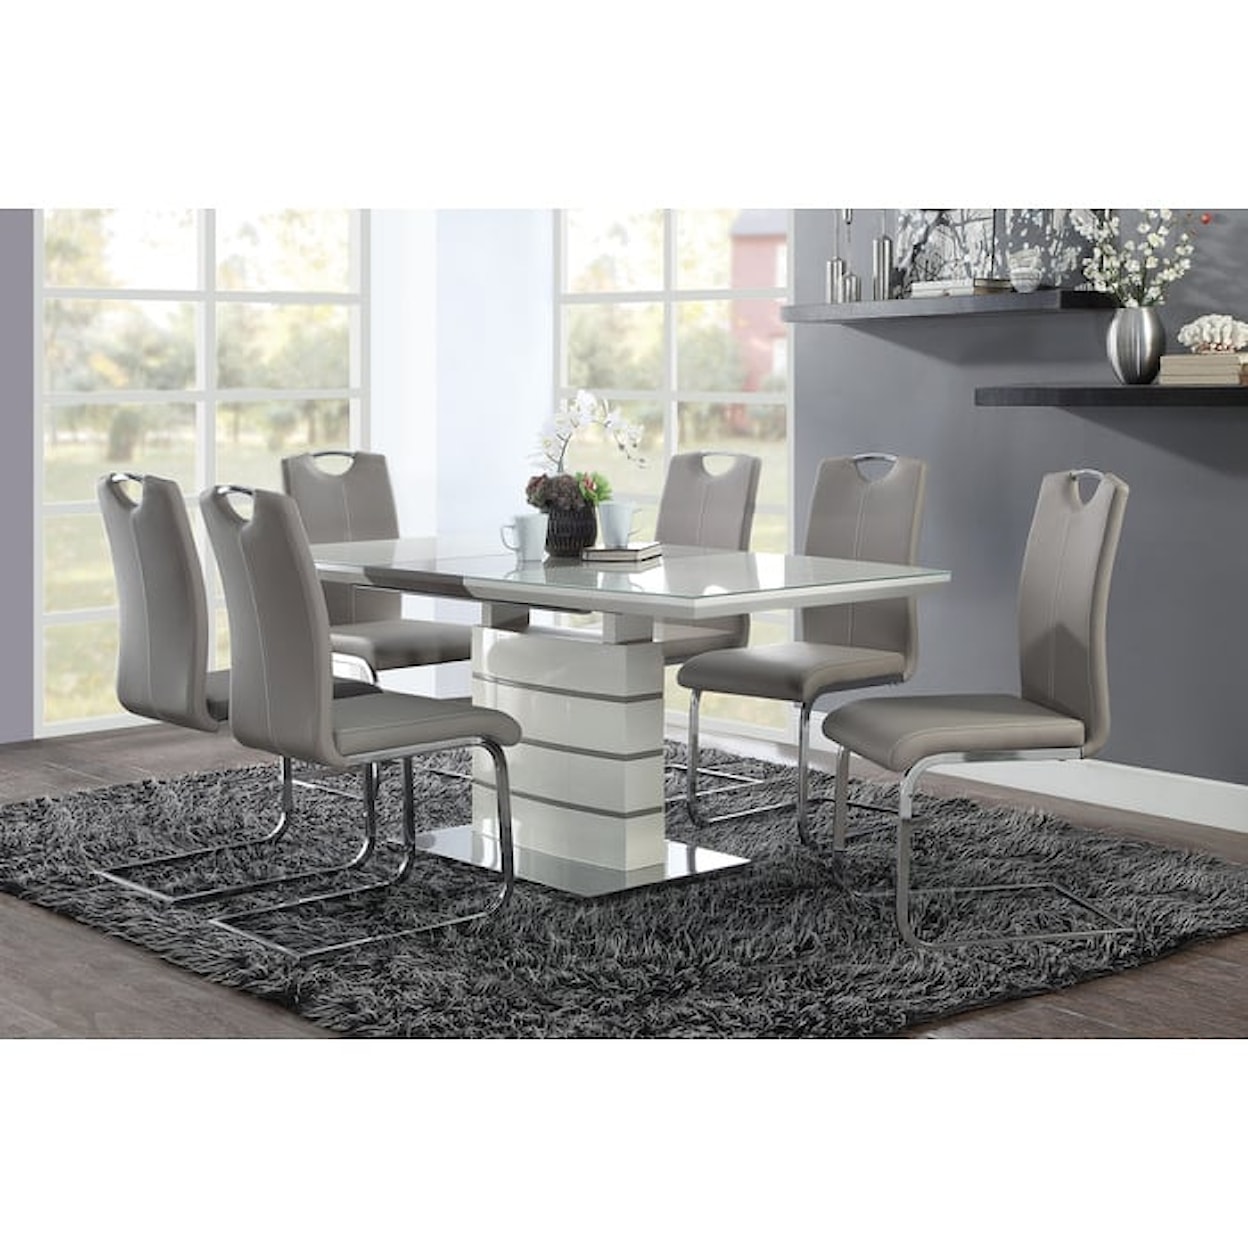 Homelegance Furniture Glissand Dining Table